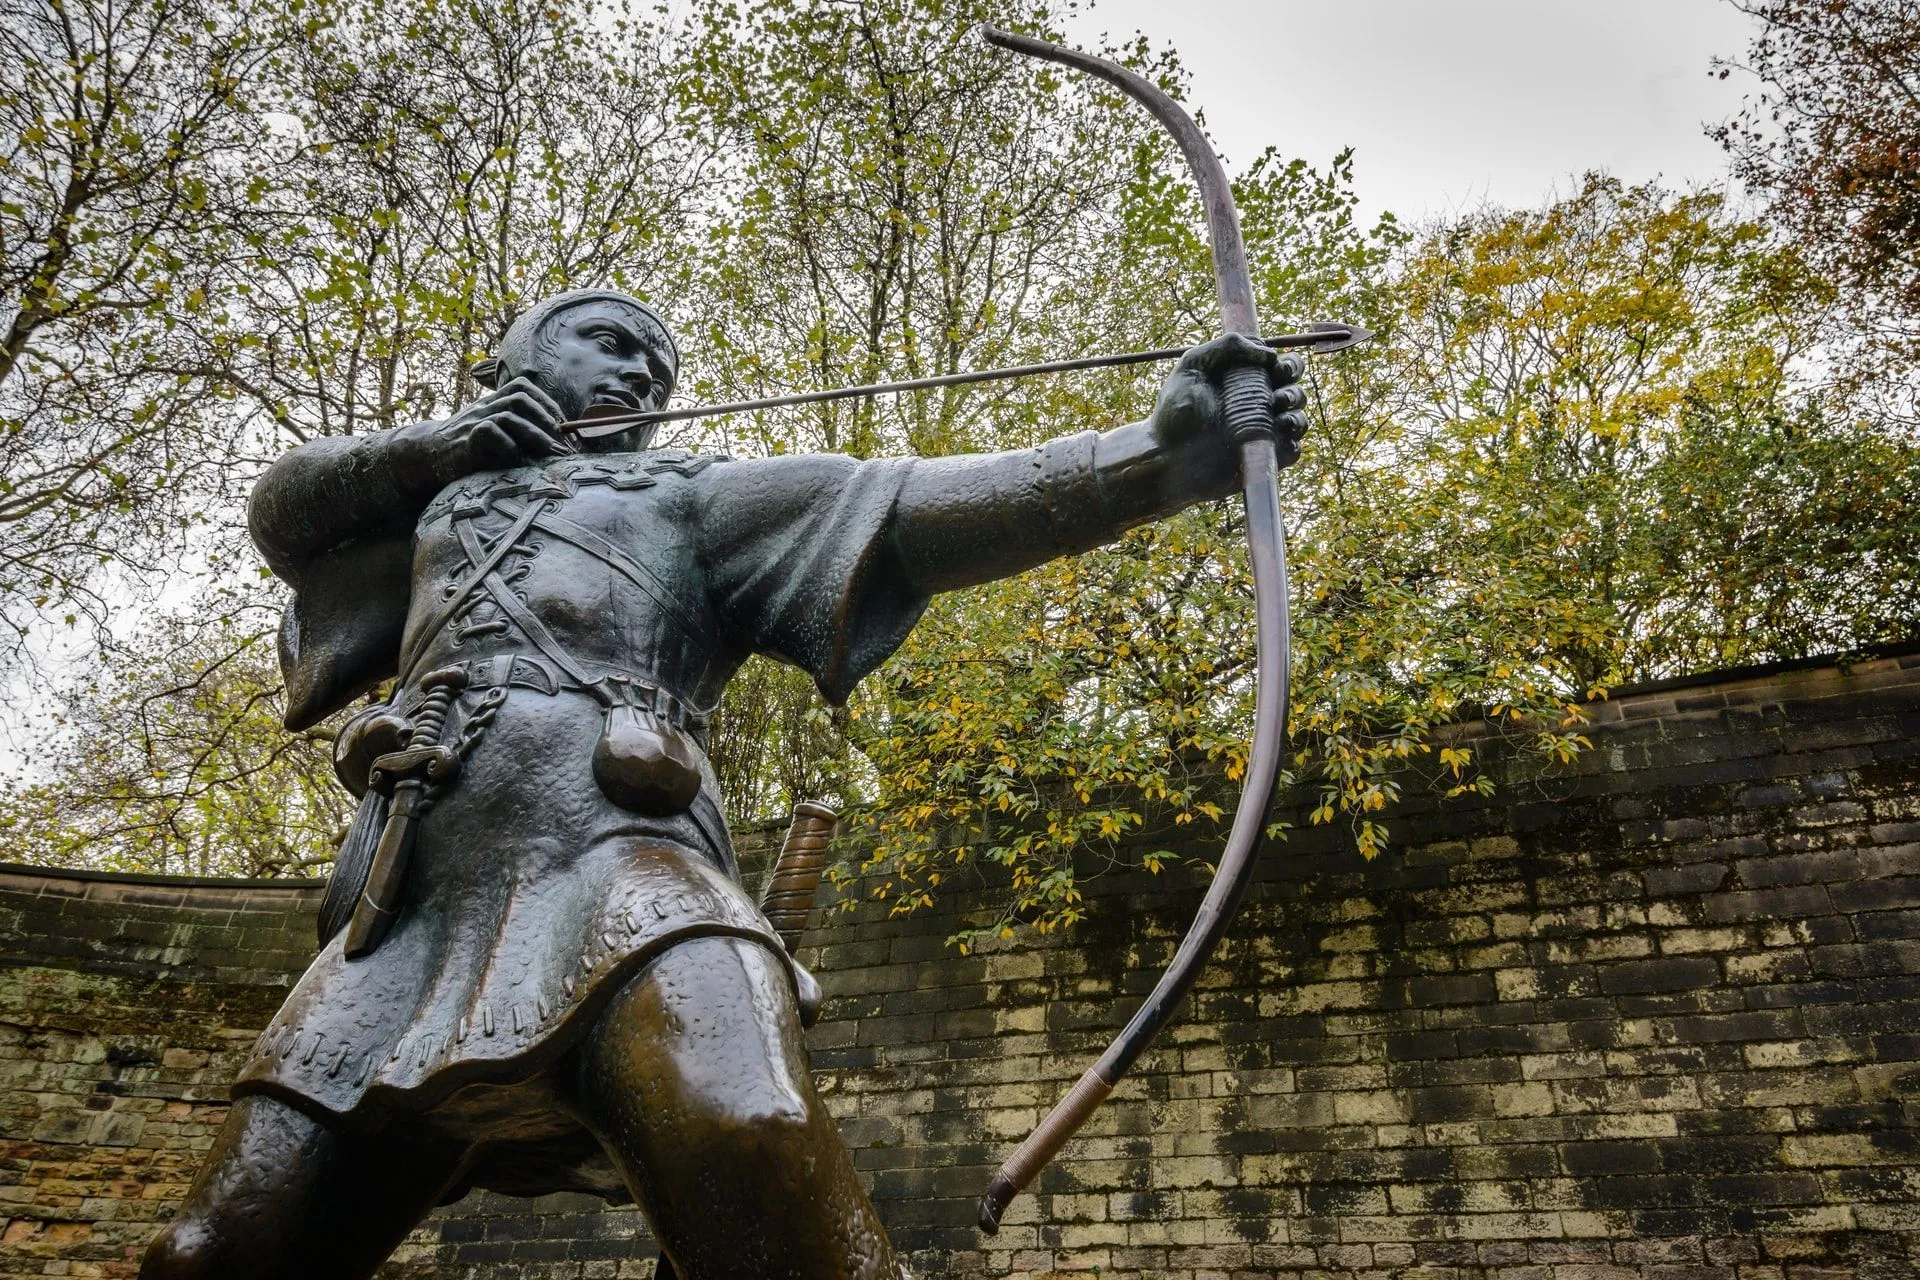 Robin hood statue with bow and arrow in England